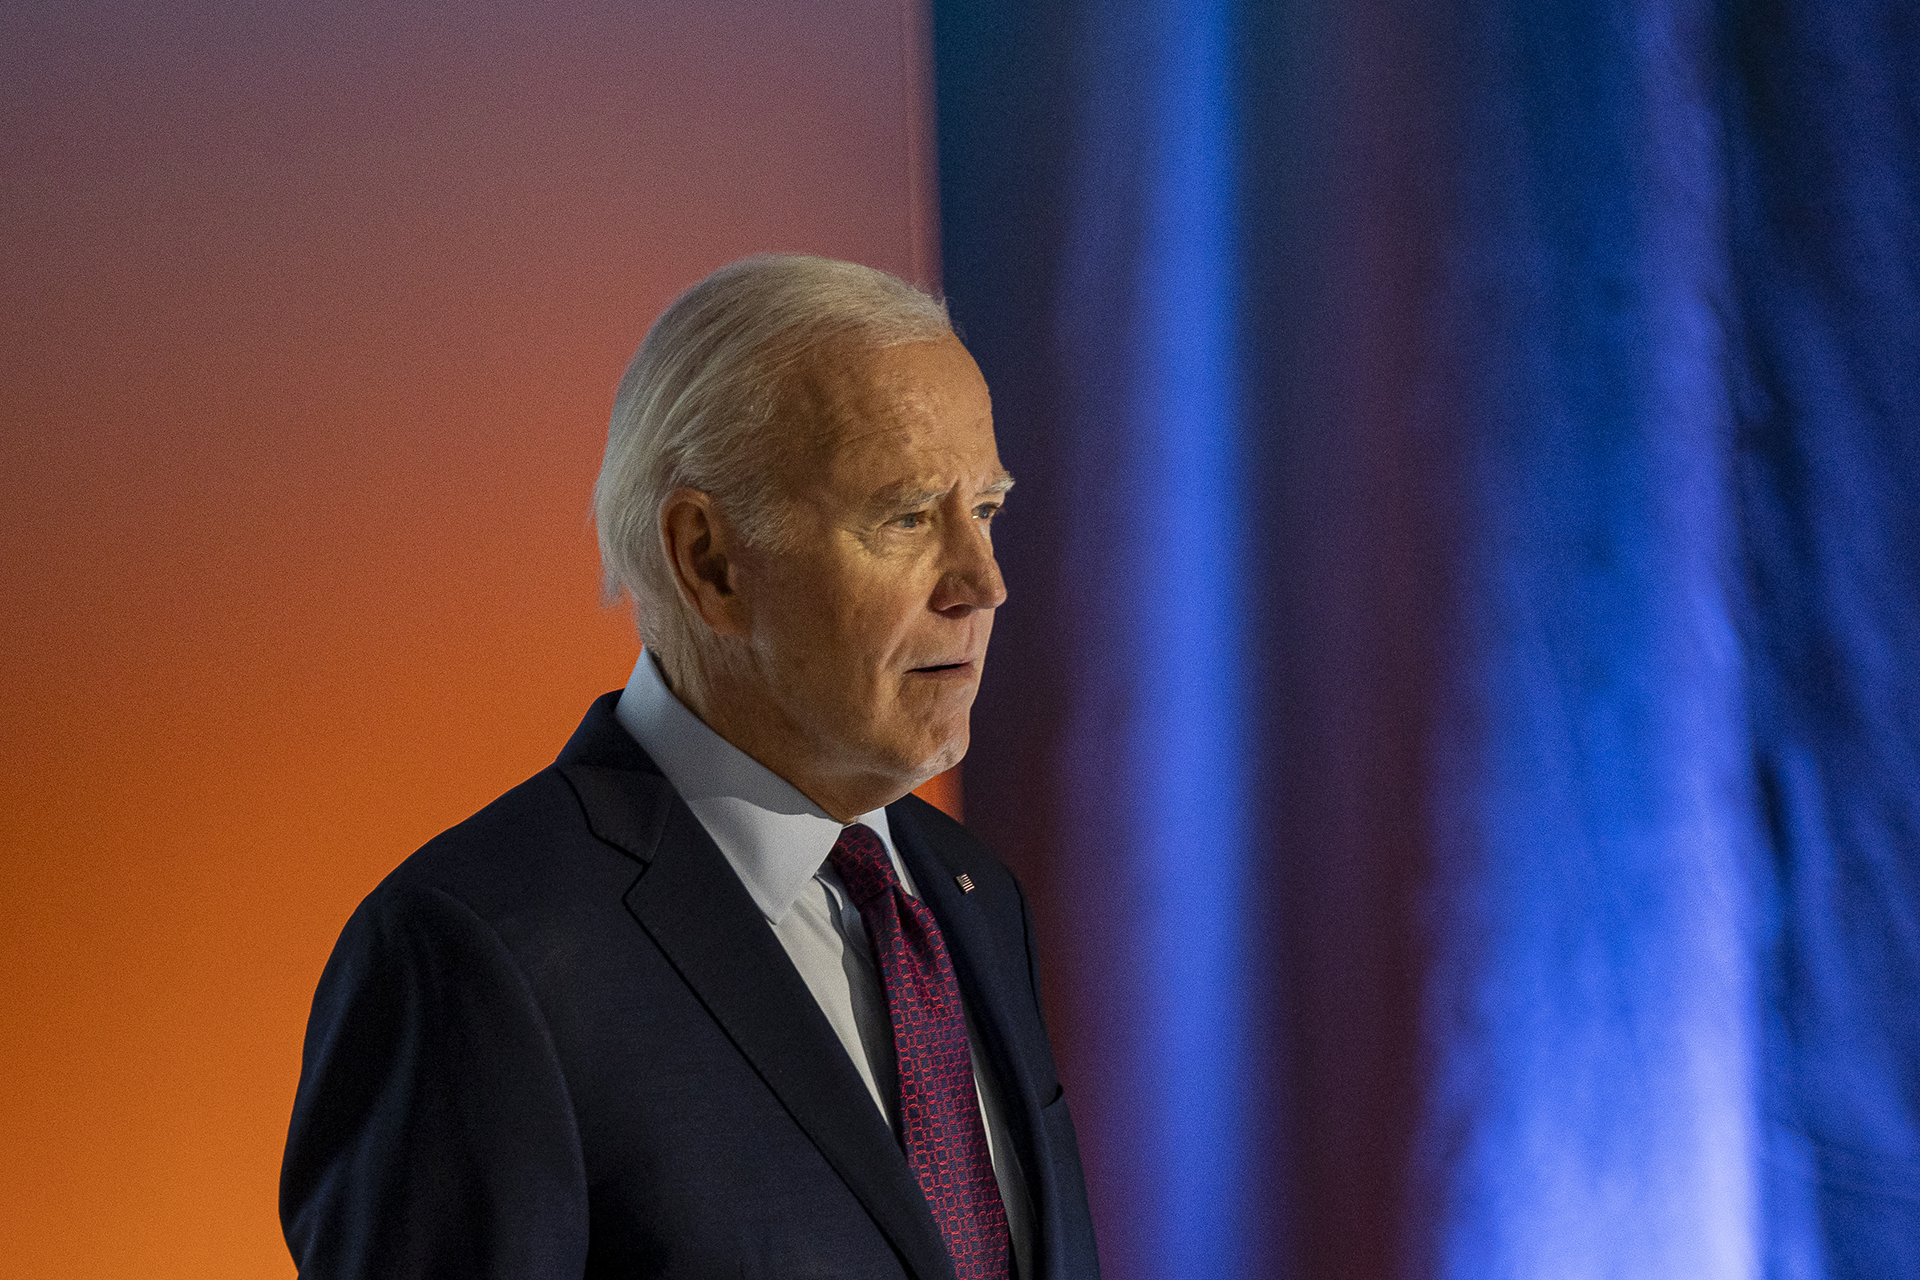 US President Joe Biden standing in front of a blue curtain and orange background.